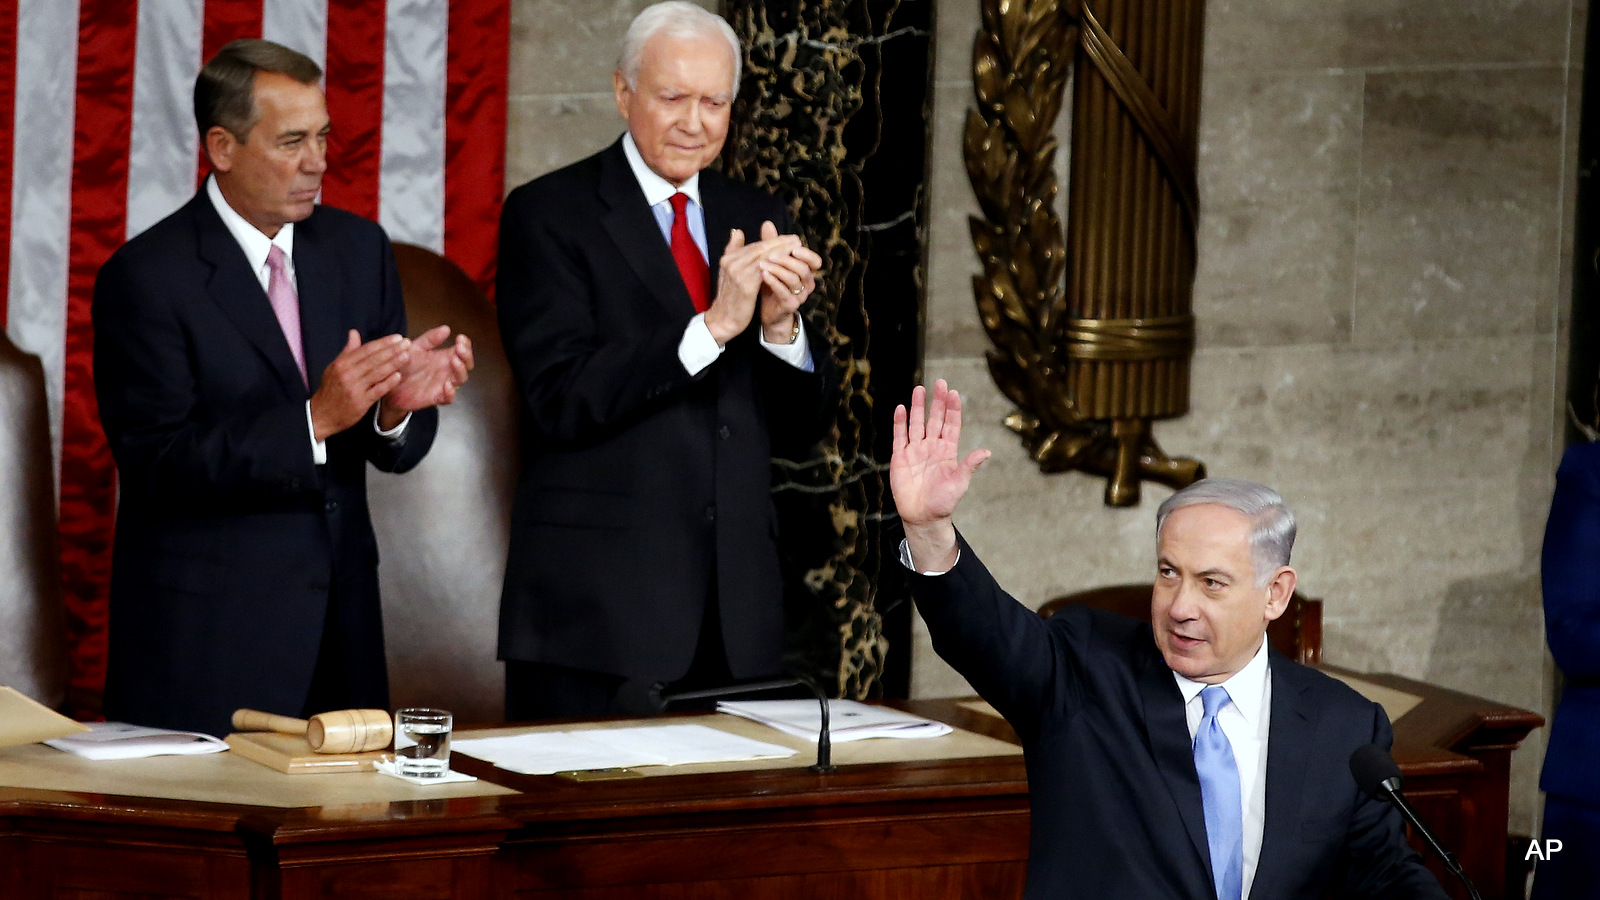 Israeli Prime Minister Benjamin Netanyahu waves as he step to the podium prior to speaking before a joint meeting of Congress on Capitol Hill in Washington, Tuesday, March 3, 2015. Prime Minister Netanyahu is used the address to warn against trusting Iran to curb its nuclear ambitions.